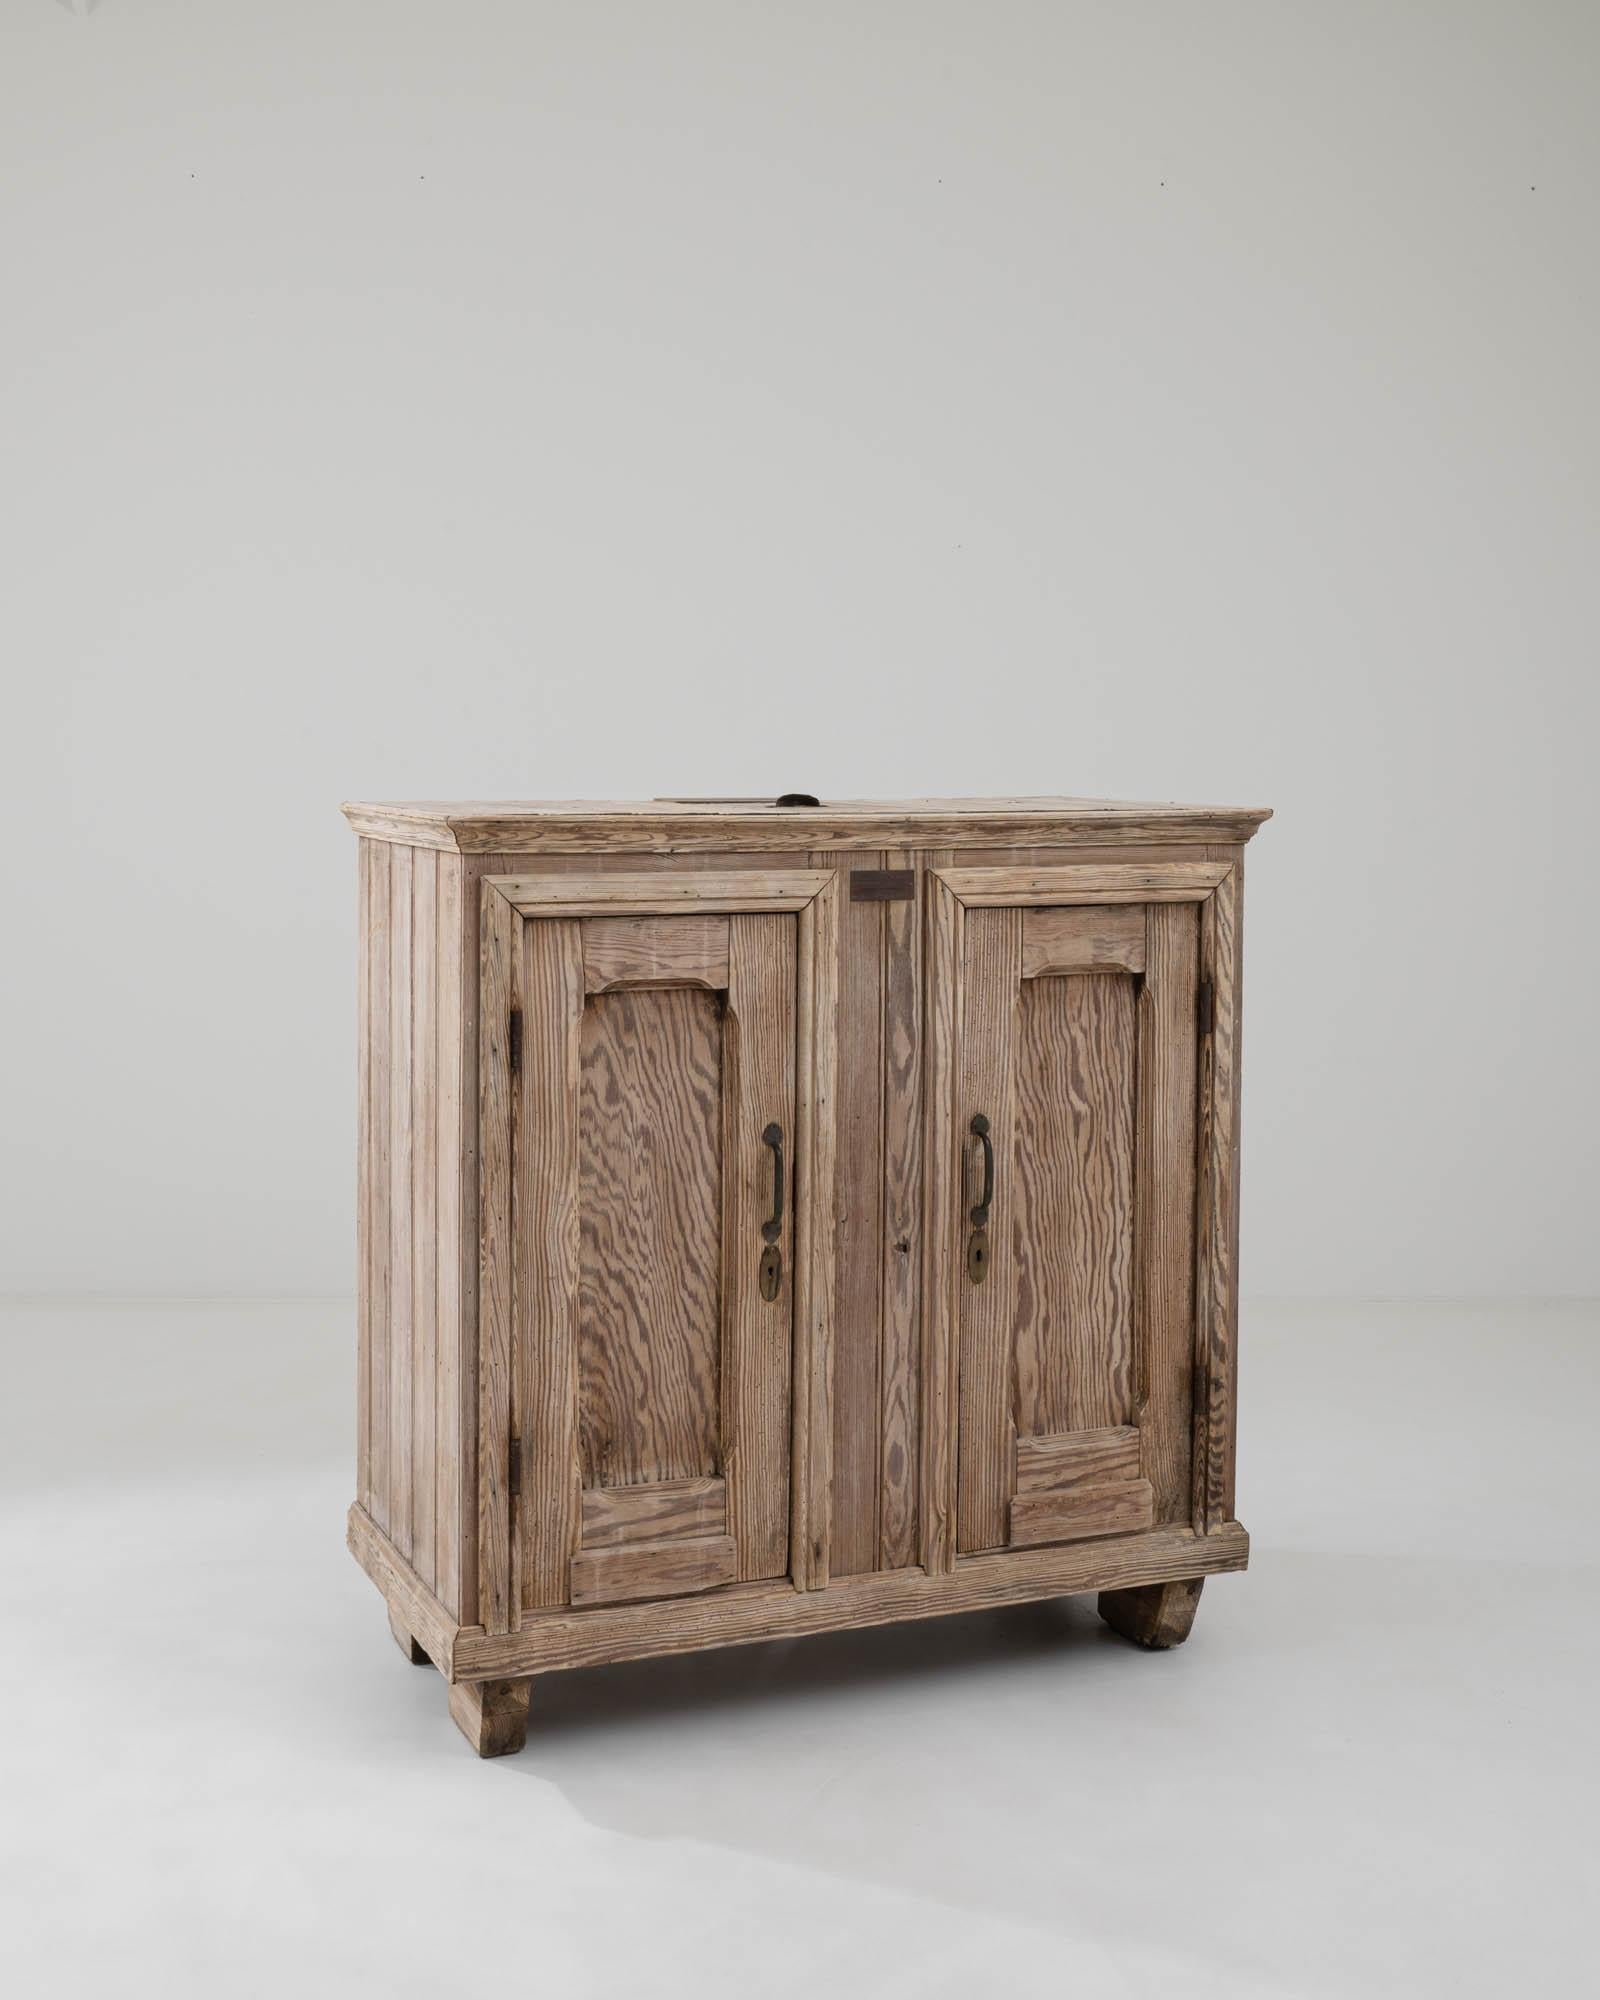 A wooden ice chestcreated in 1900s Belgium. This intriguing piece exudes a timeless air despite its antiquated use. Serving a unique function, this antiquated refridgerator would have stored ice, along with other perishibles, specially insulated to